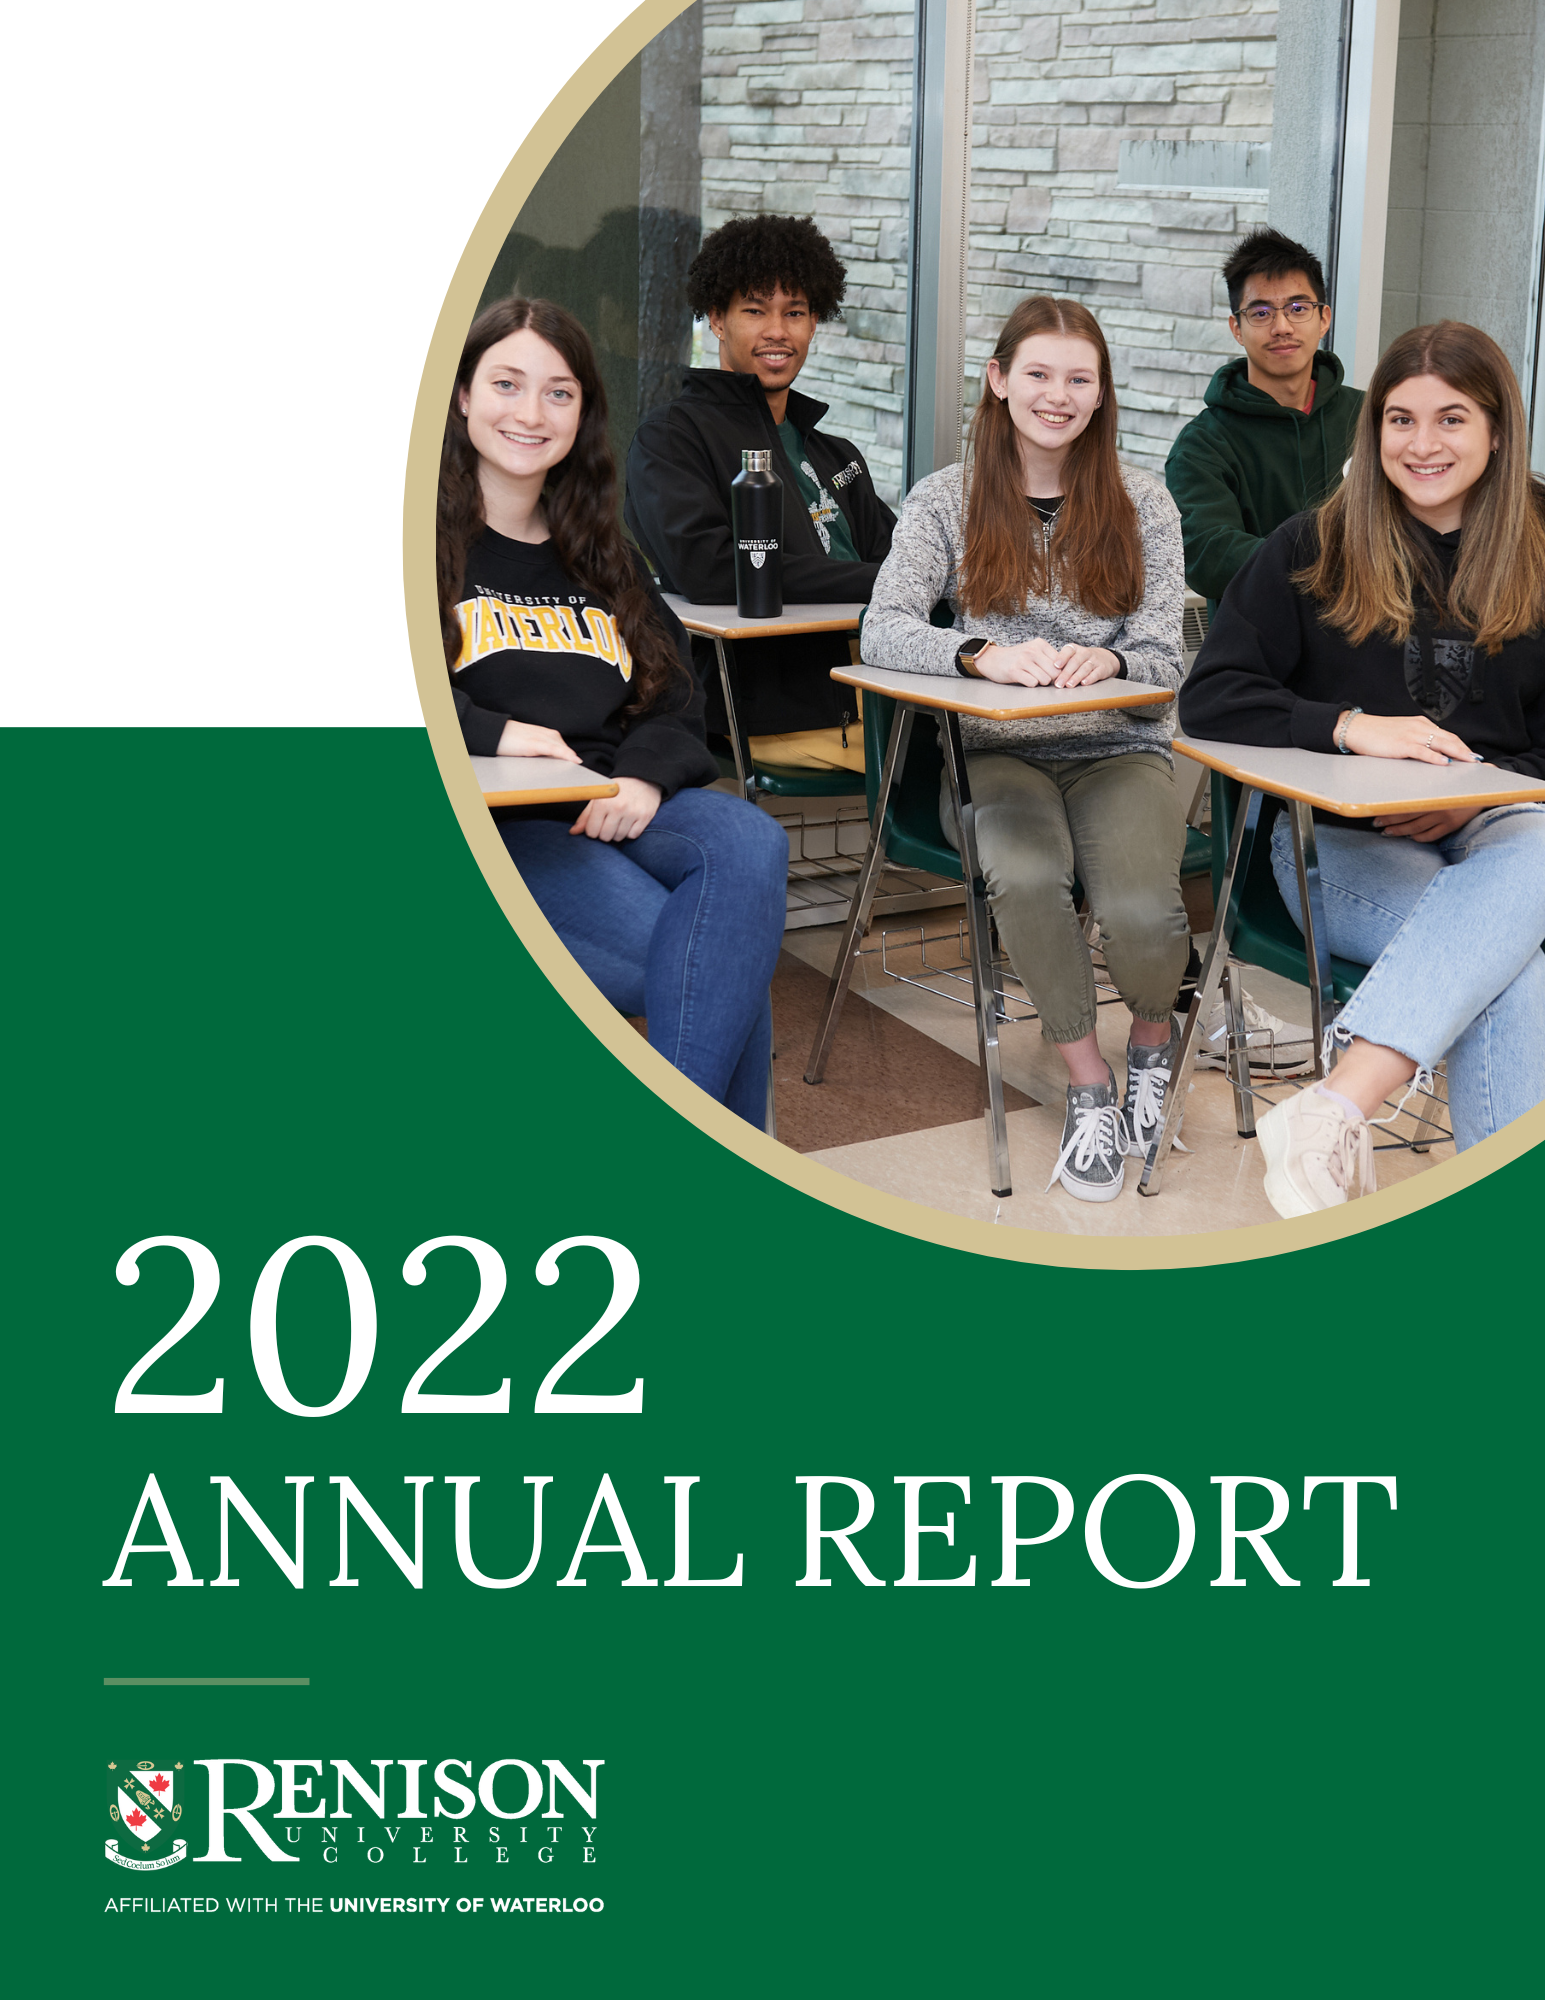 2022 Annual Report Cover, features students sitting at desks and smiling. 